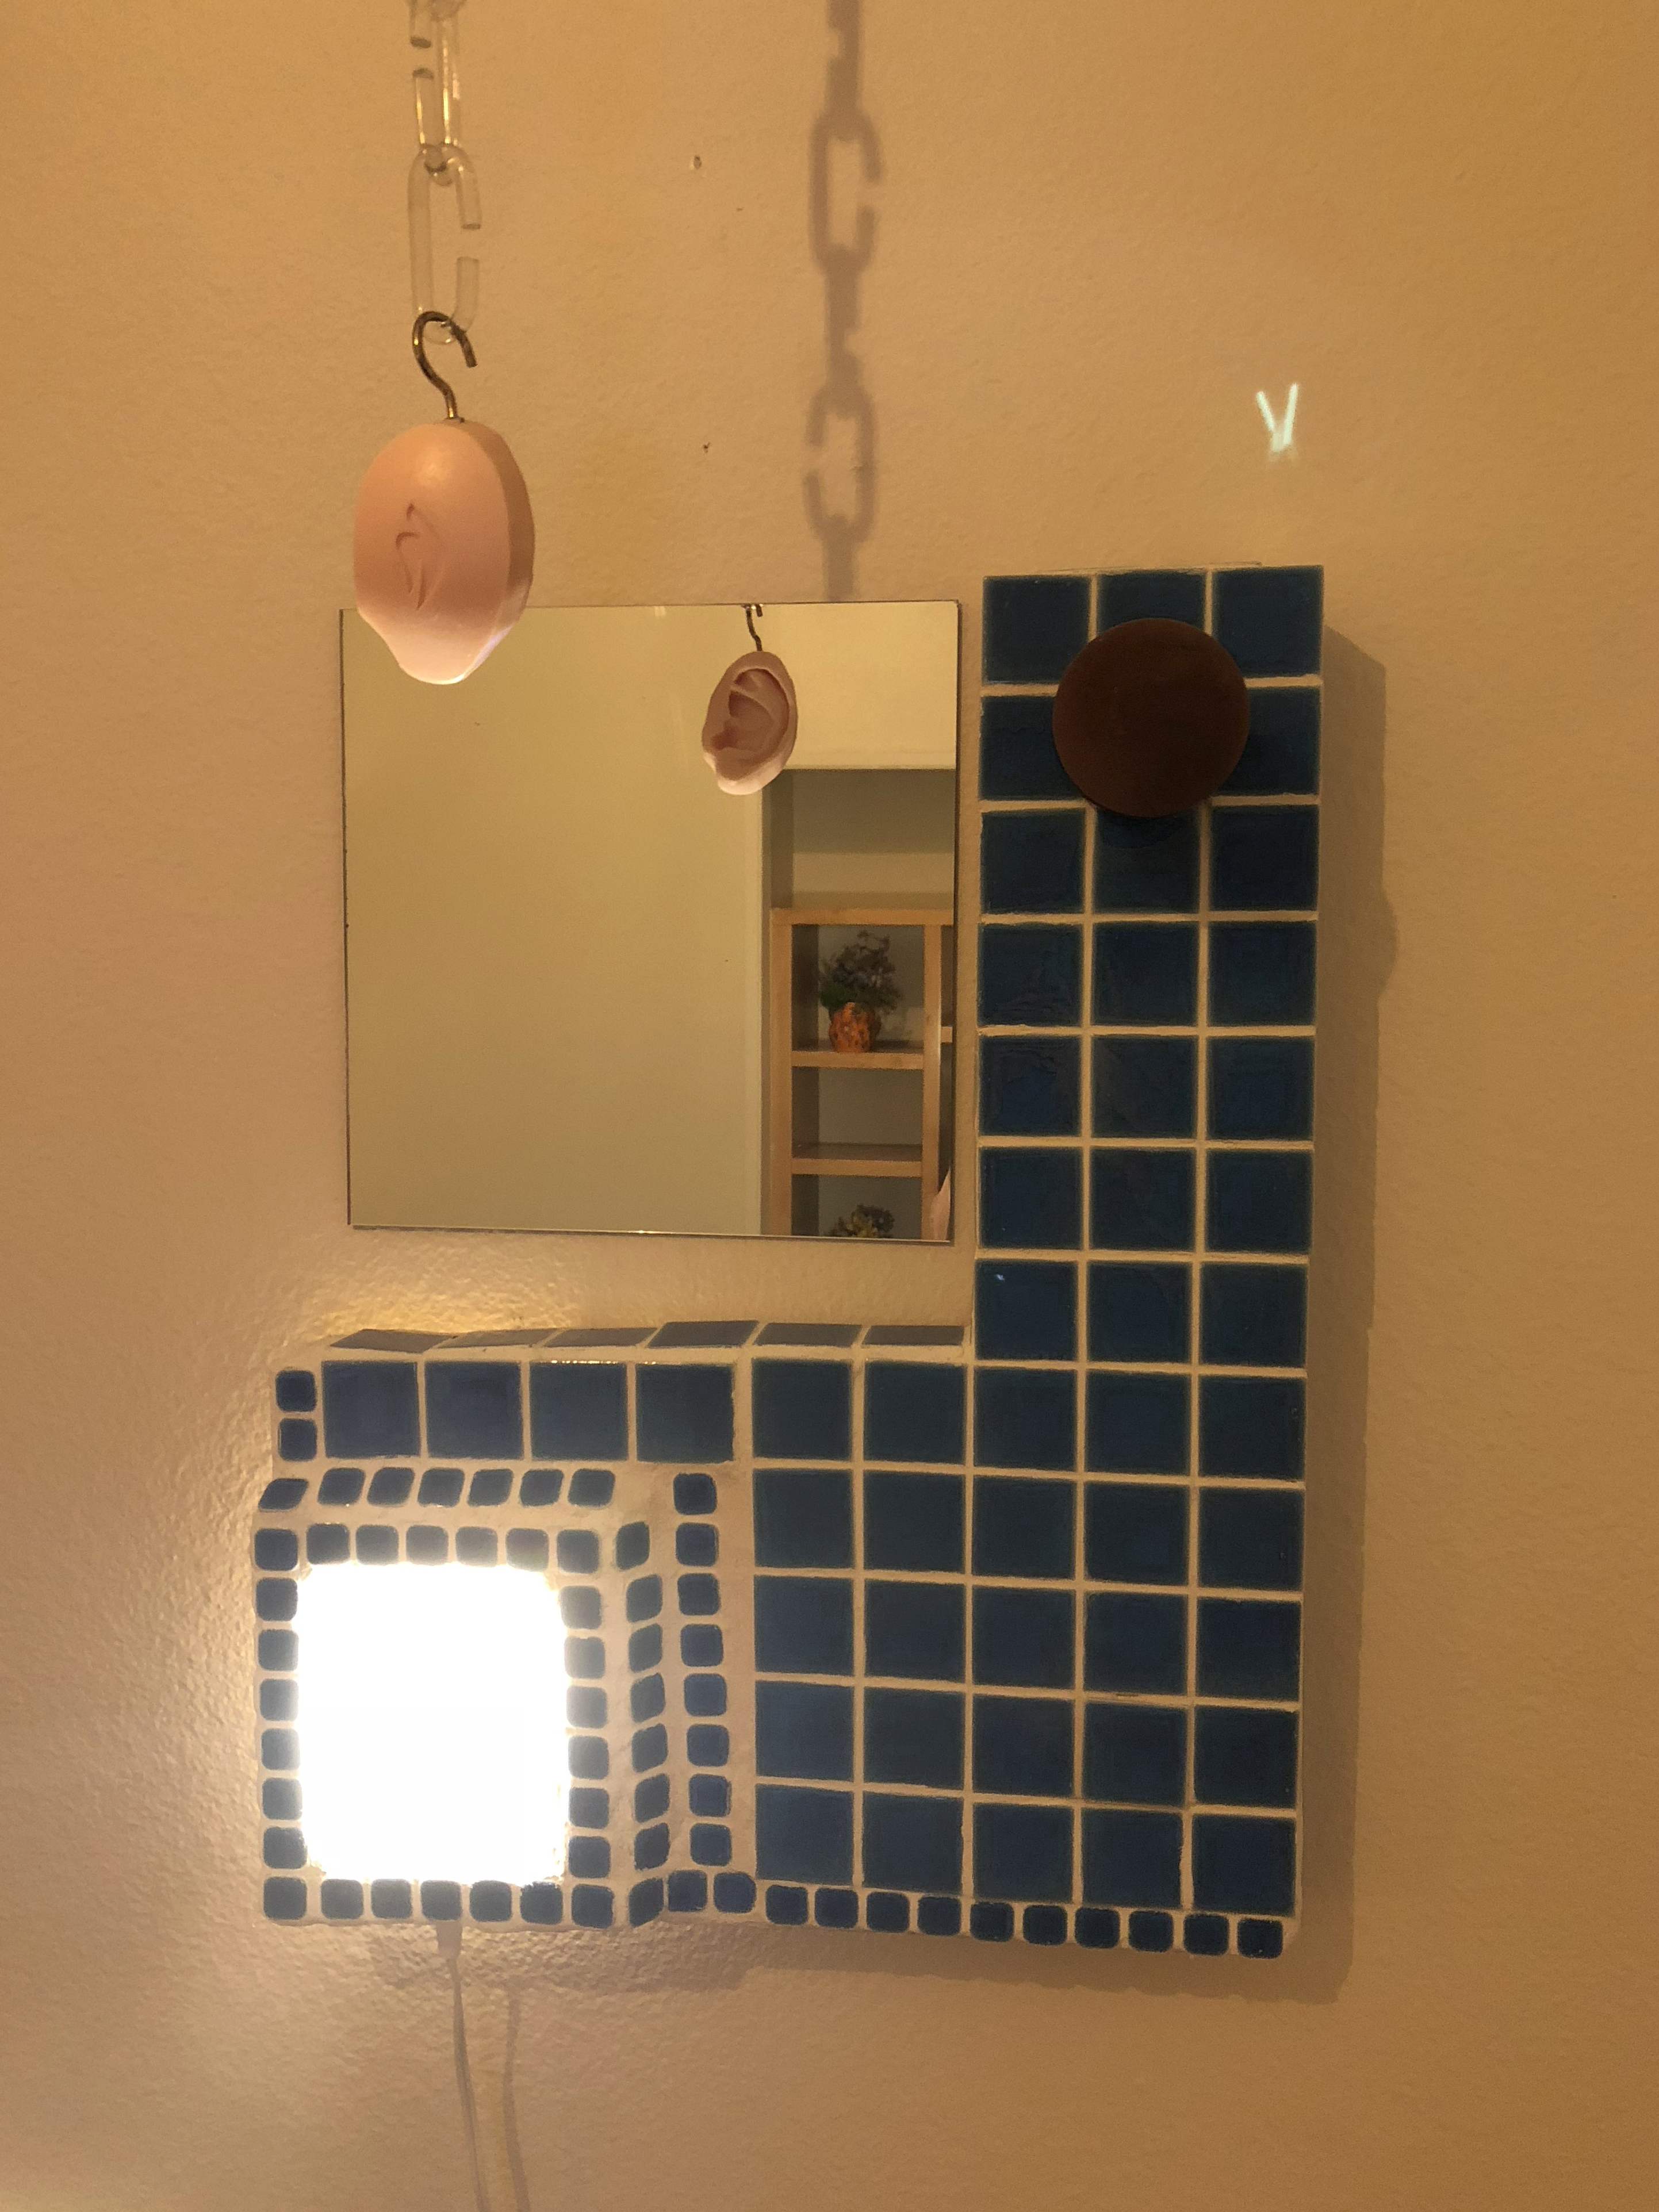 Detail of a sculptural wall lamp made of tile and mirror with a soap sculpture hung in front of it